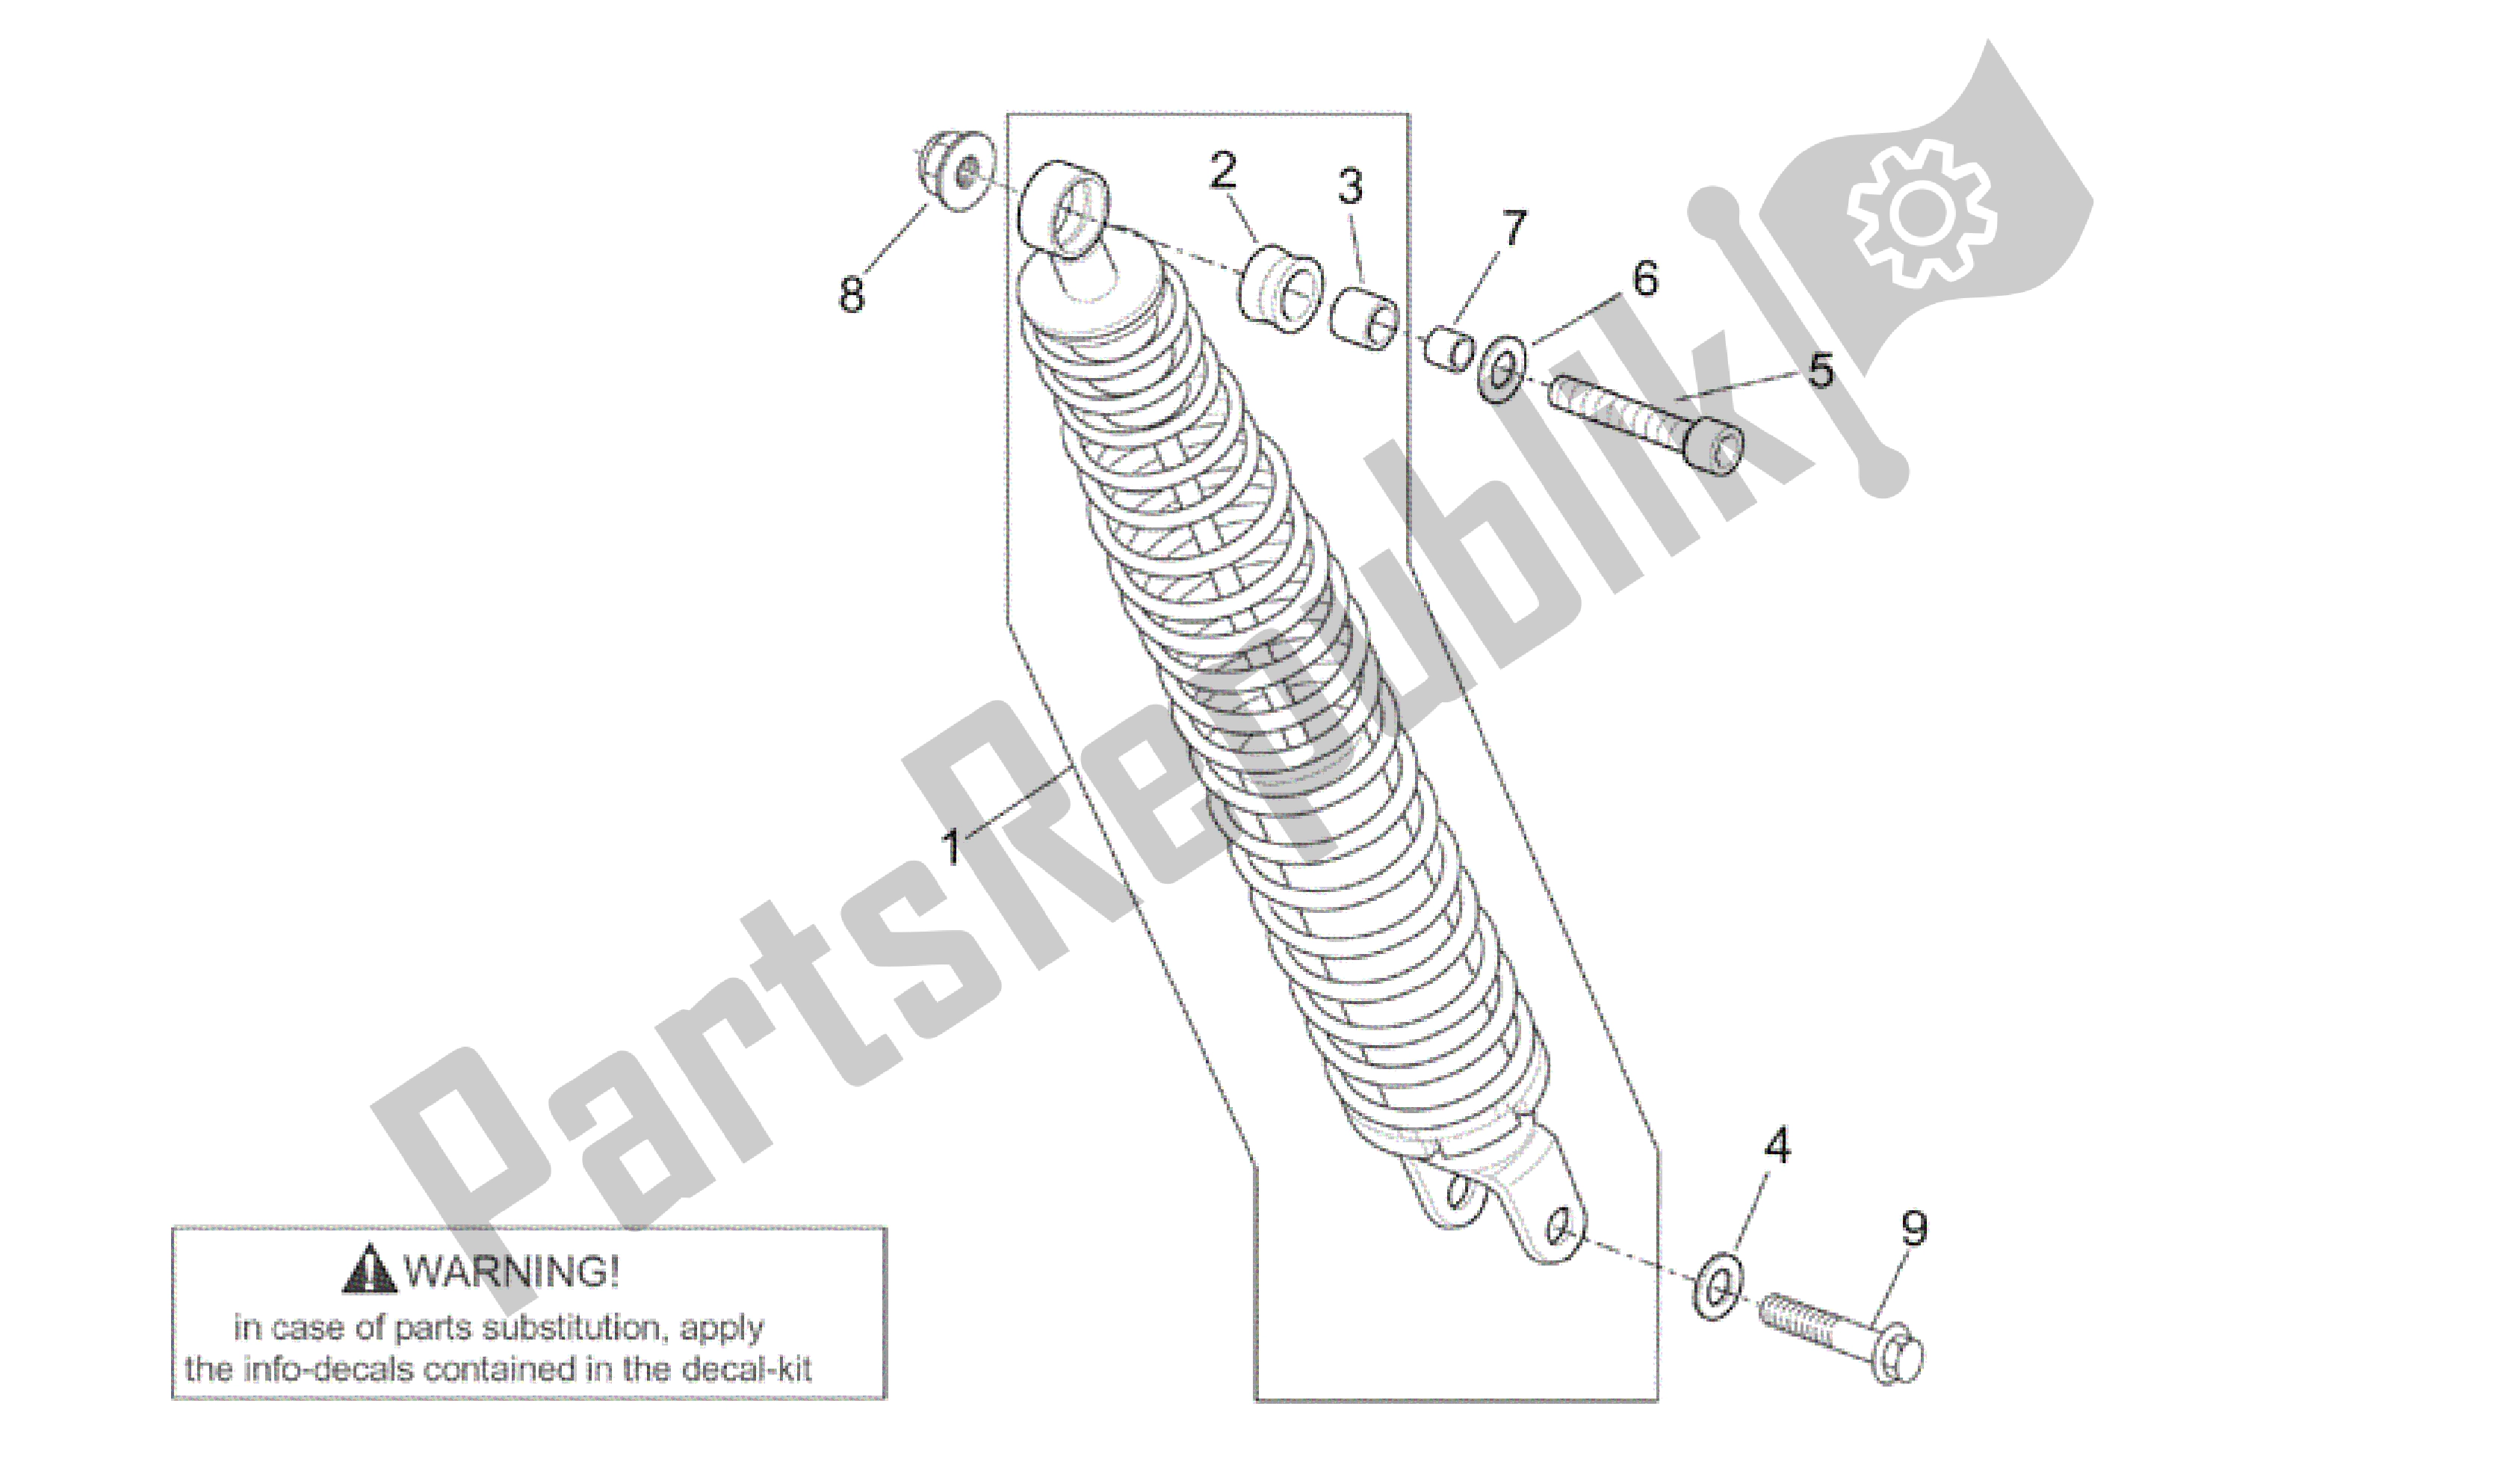 All parts for the Rear Shock Absorber of the Aprilia Scarabeo 125 1999 - 2004